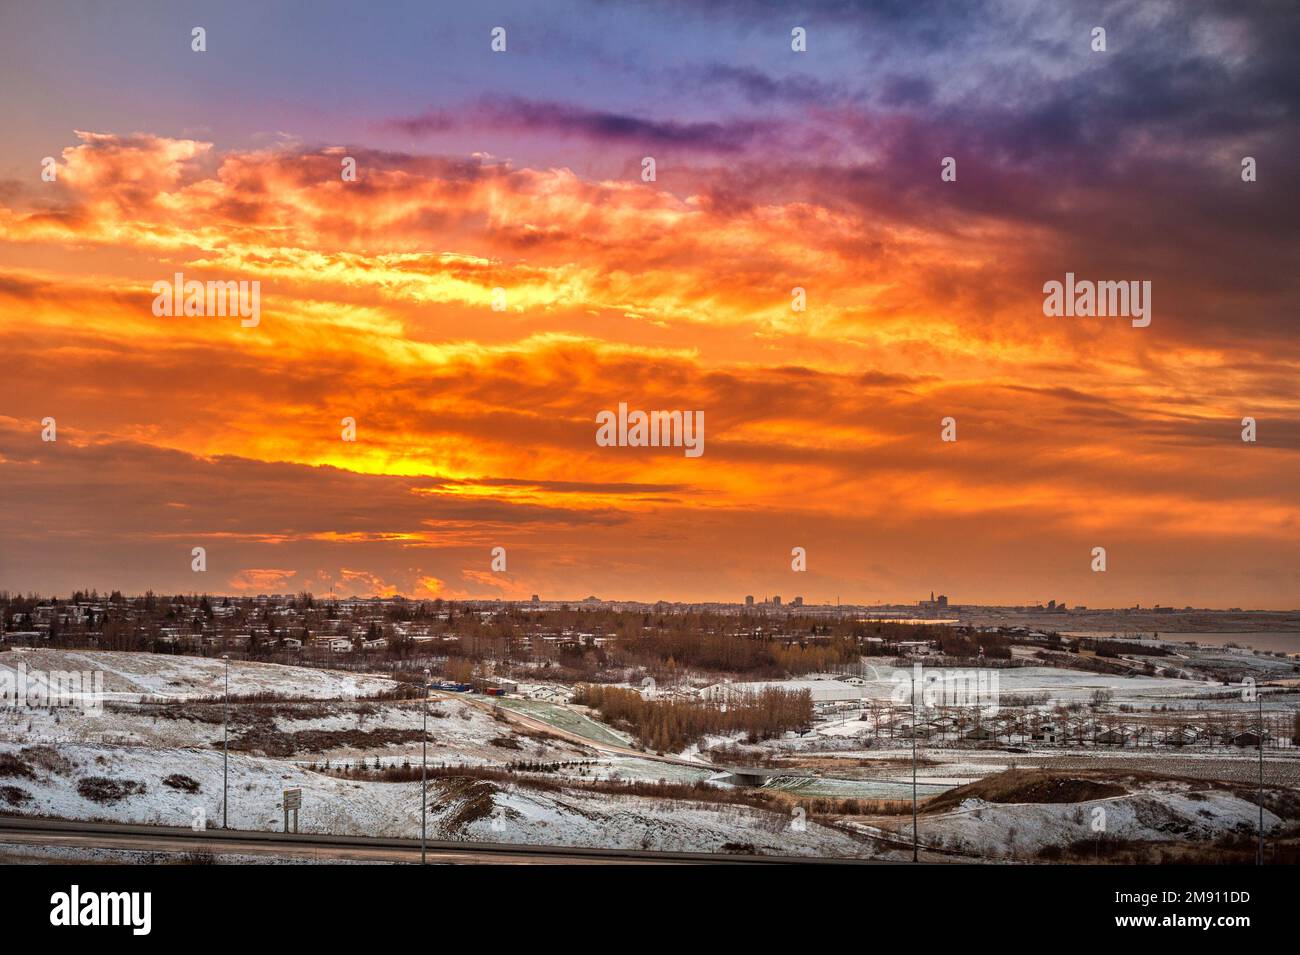 Iceland Landscape and Cityscape with Colorful Sky Stock Photo